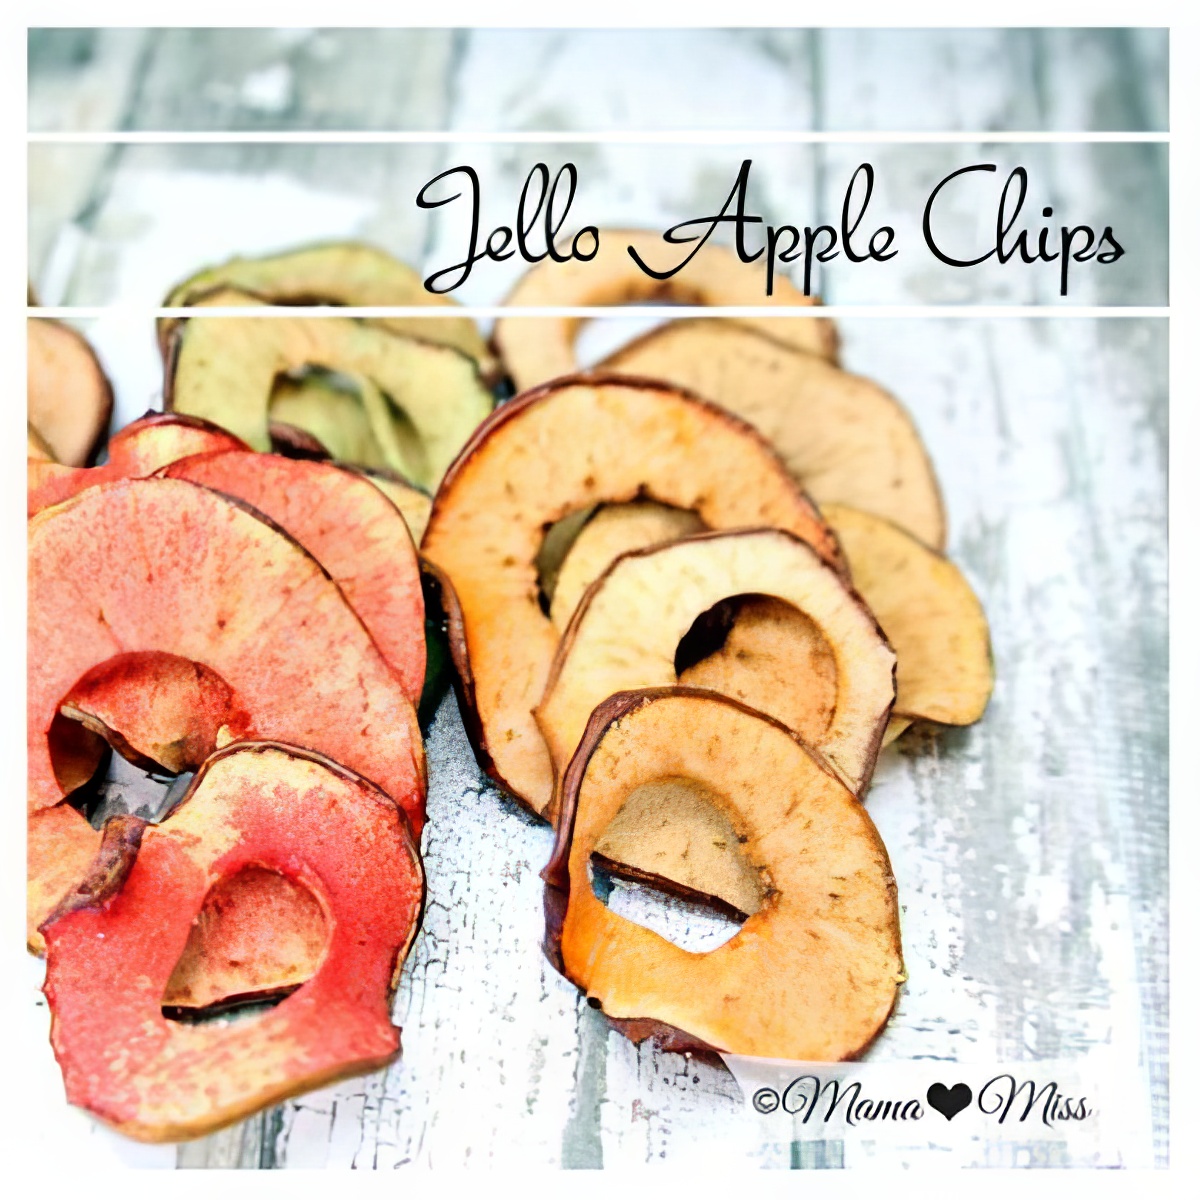 Jello Apple Chips Lunchbox Treats for Kids